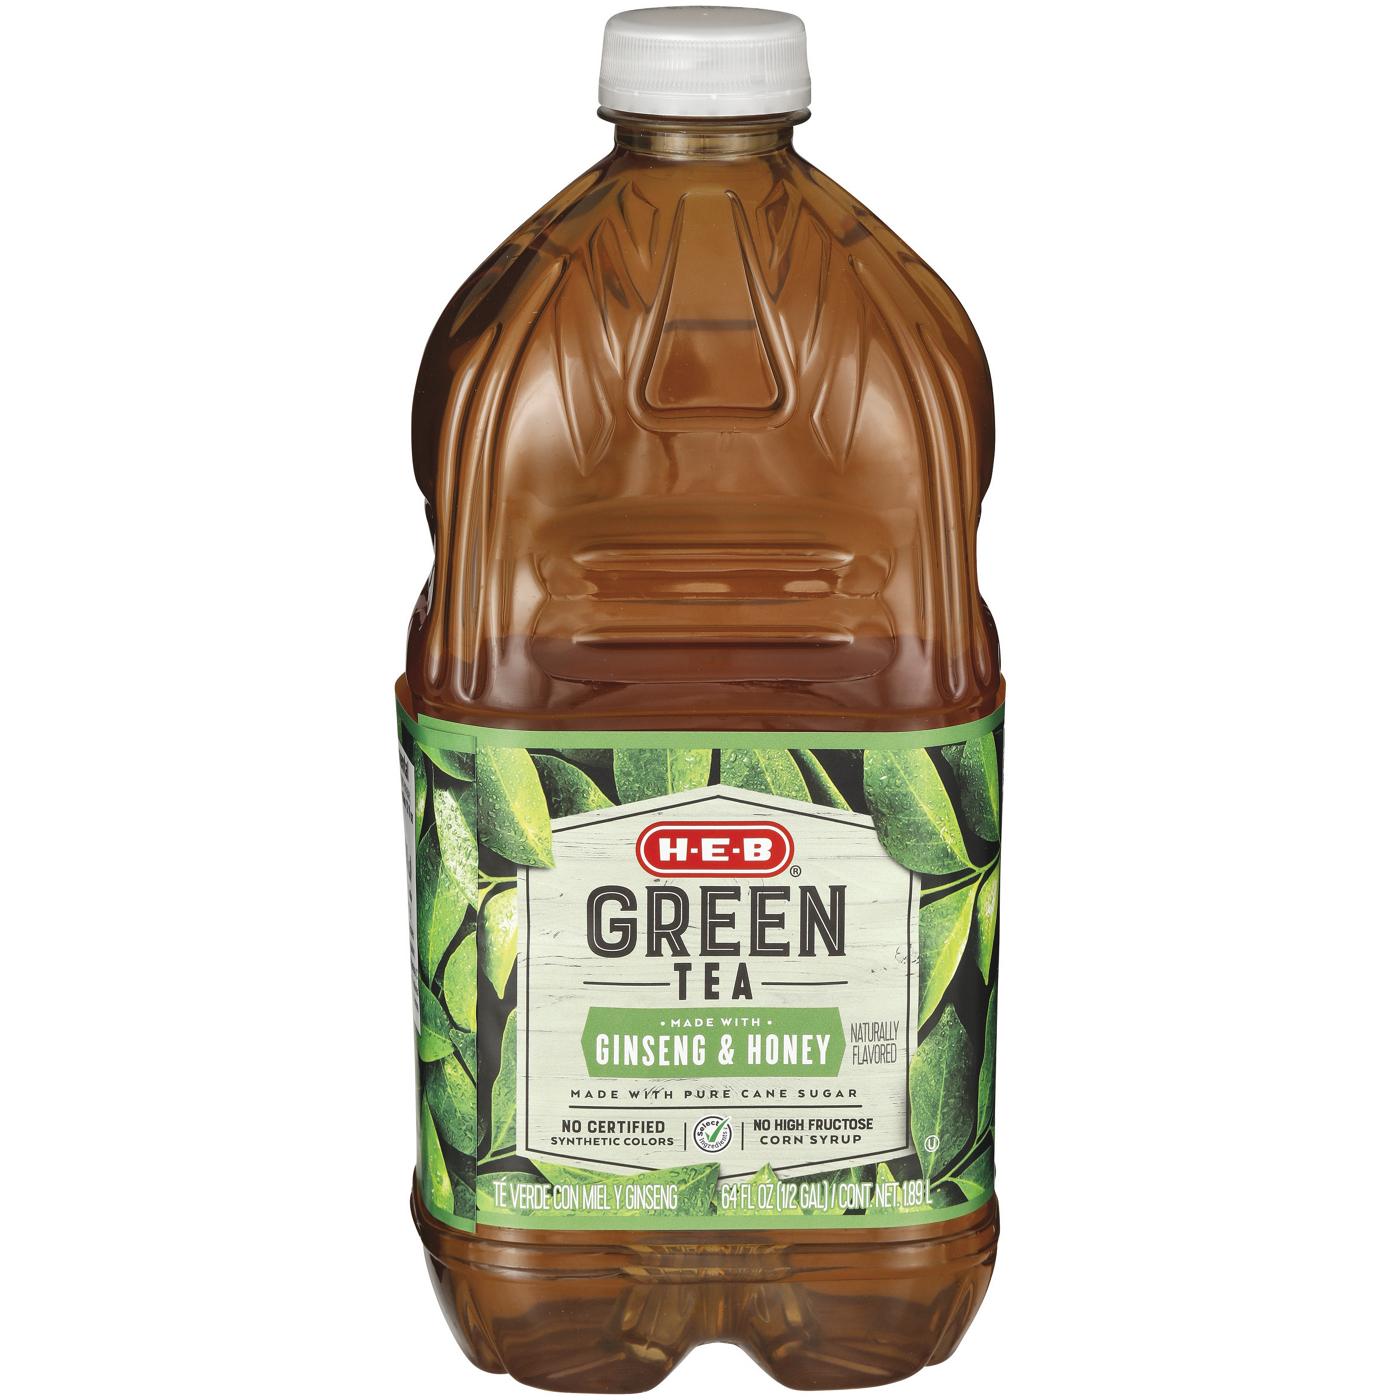 H-E-B Green Tea with Ginseng & Honey; image 1 of 2